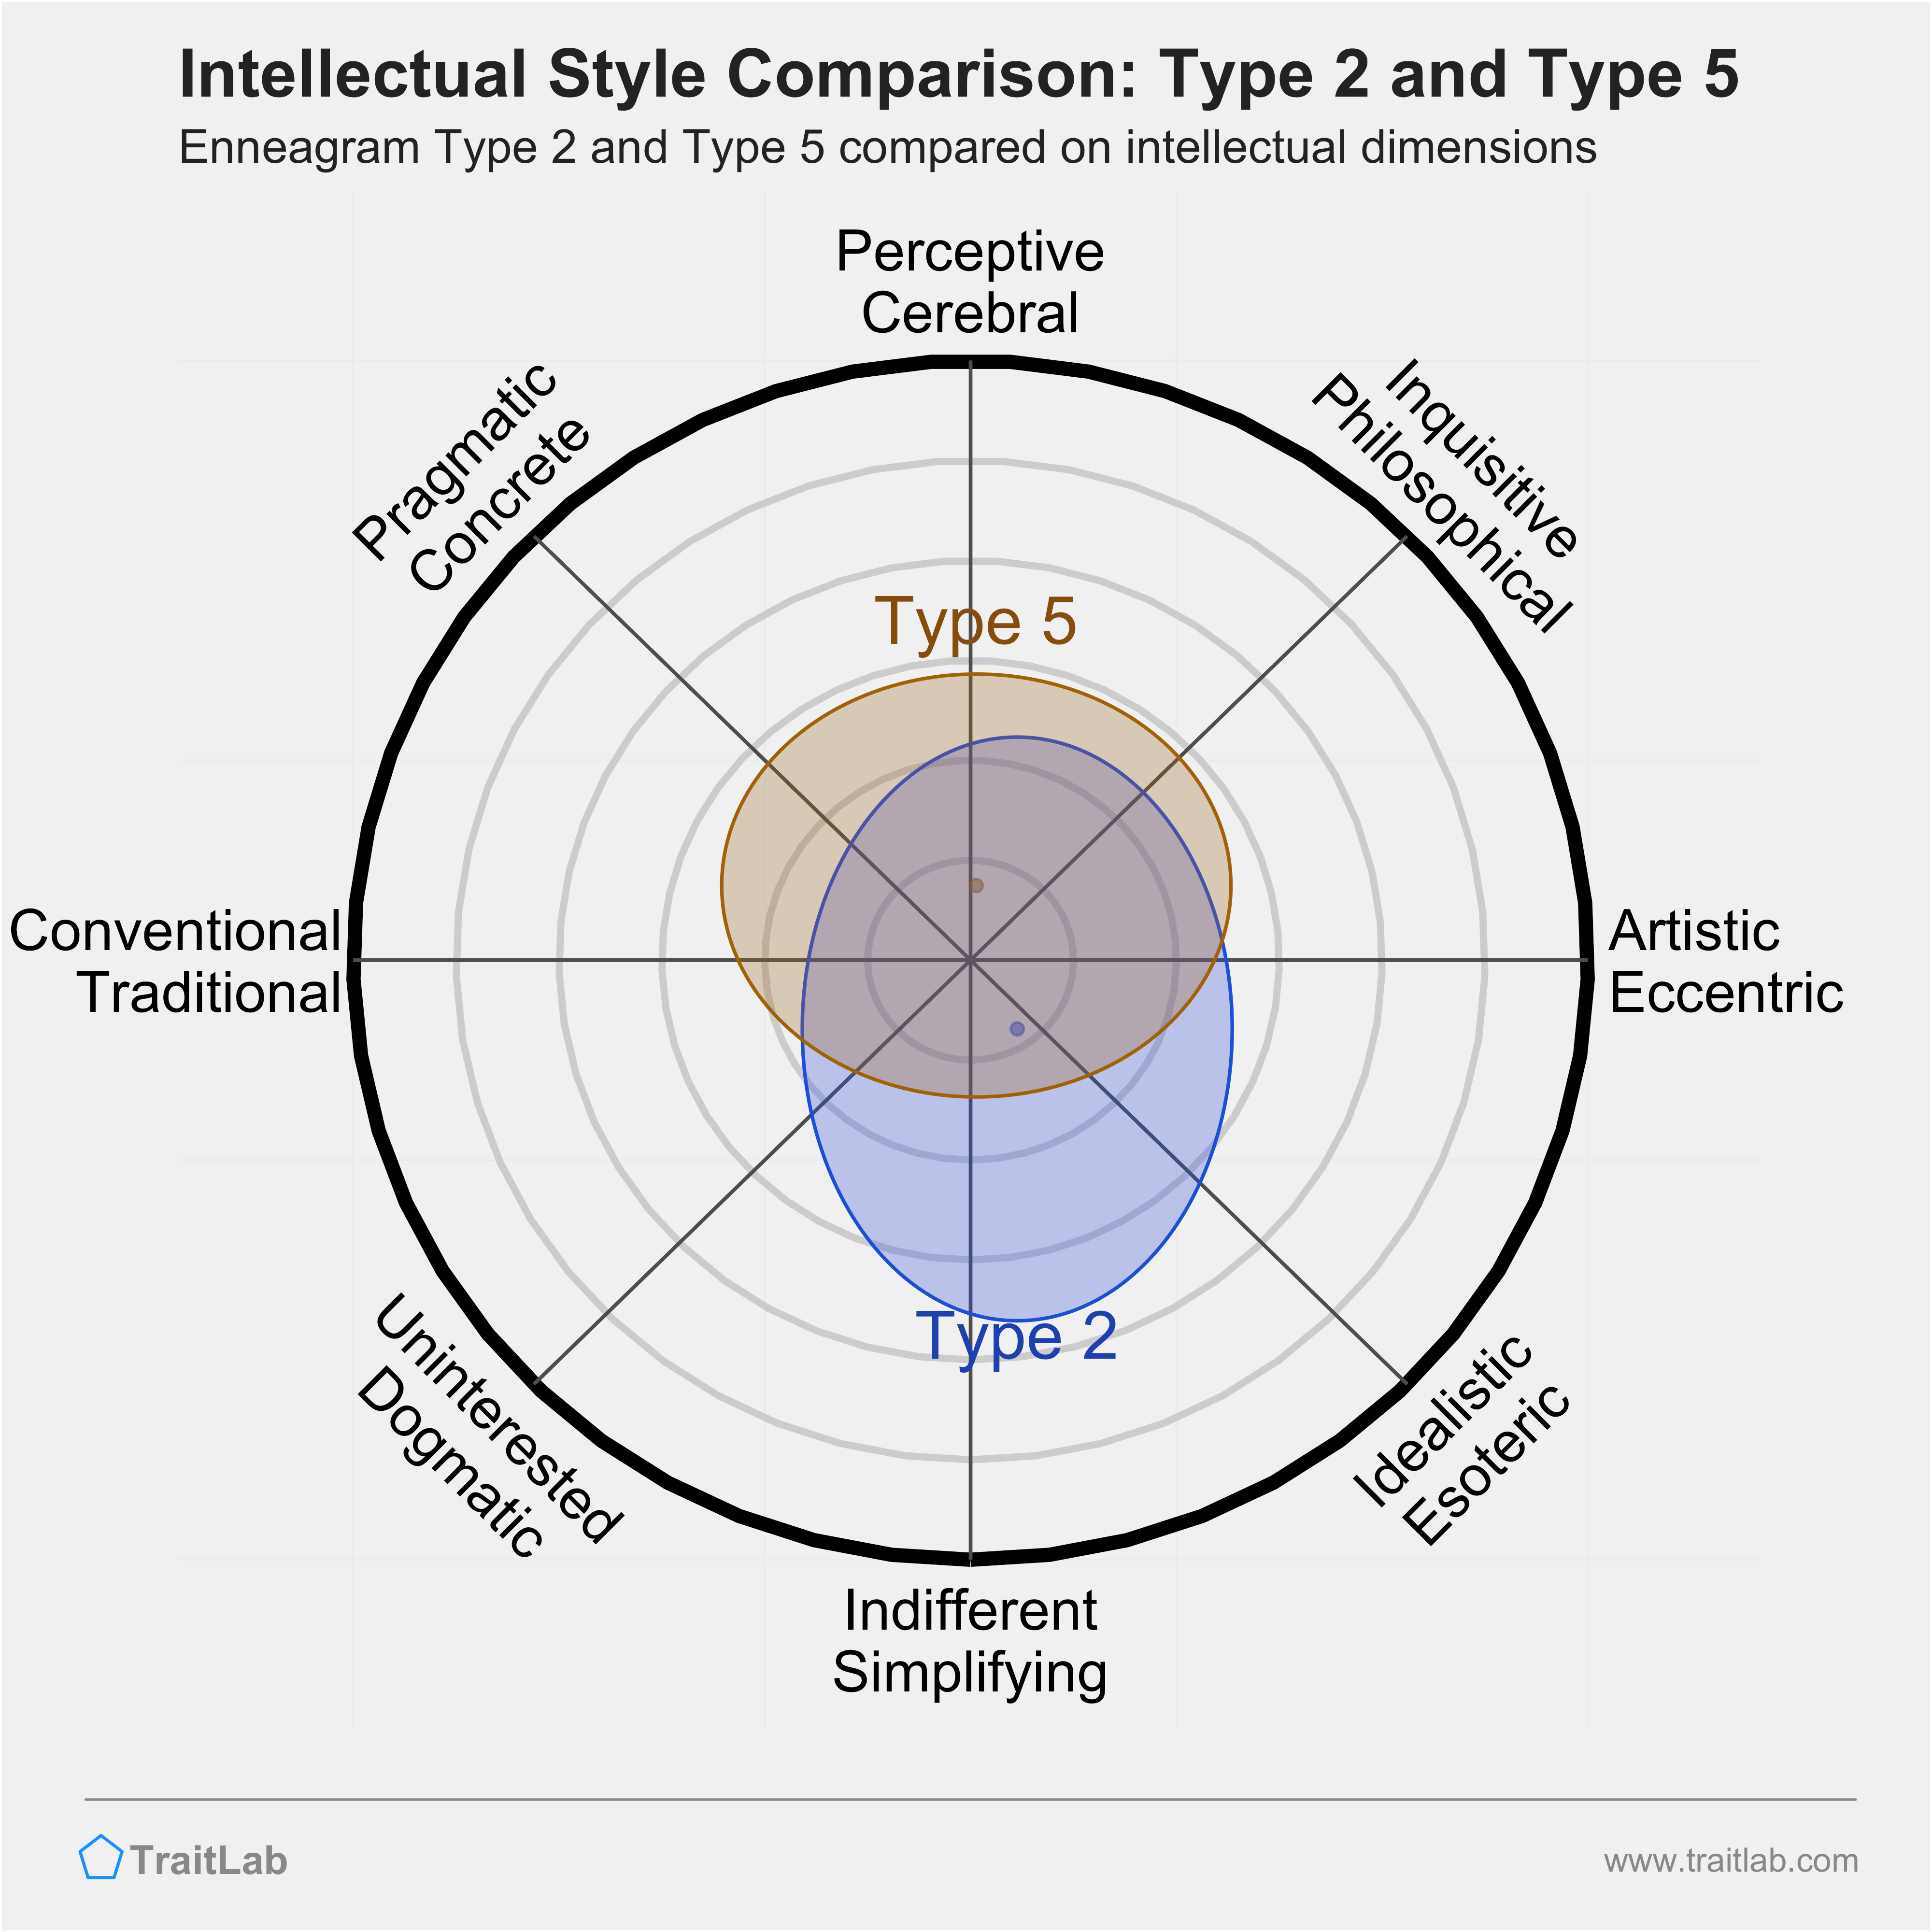 Type 2 and Type 5 comparison across intellectual dimensions